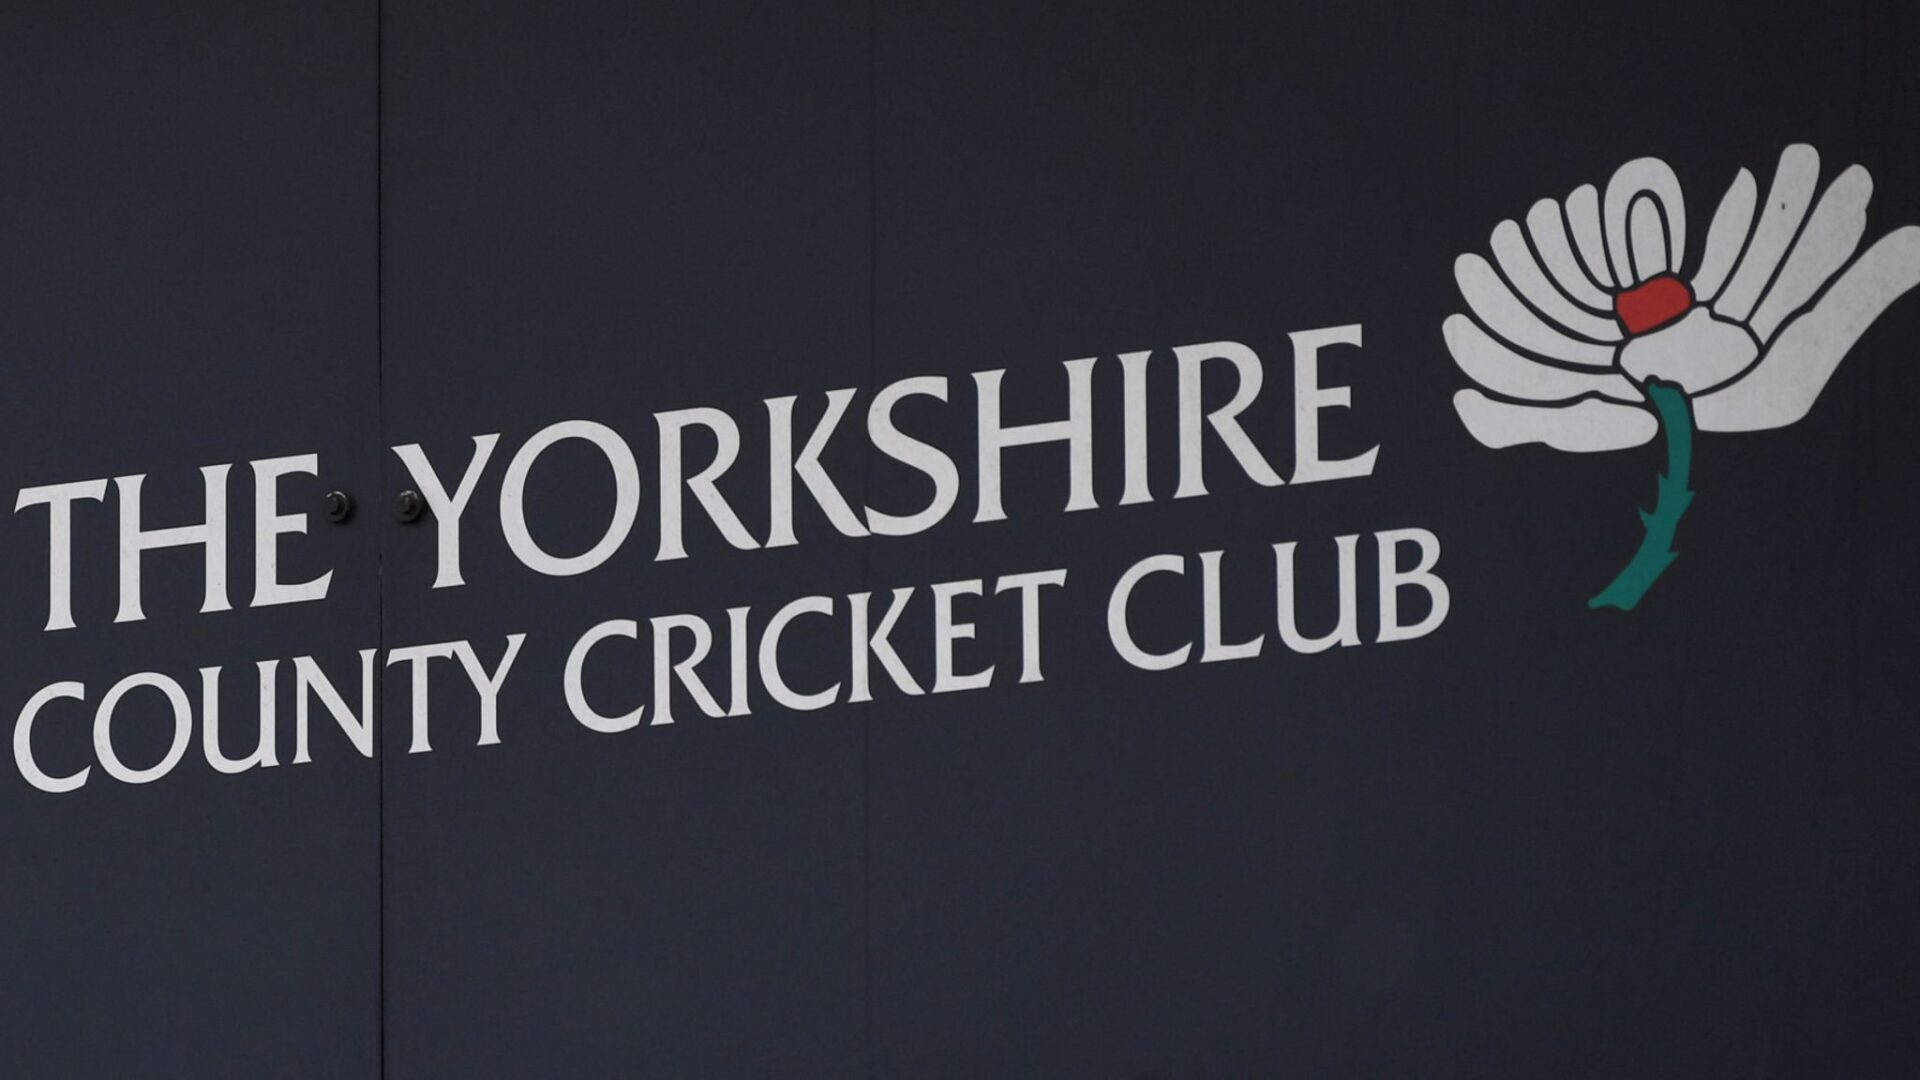 Ex-academy player alleges latest racist incident in Yorkshire to which club will be investigating -theentertainment.vision